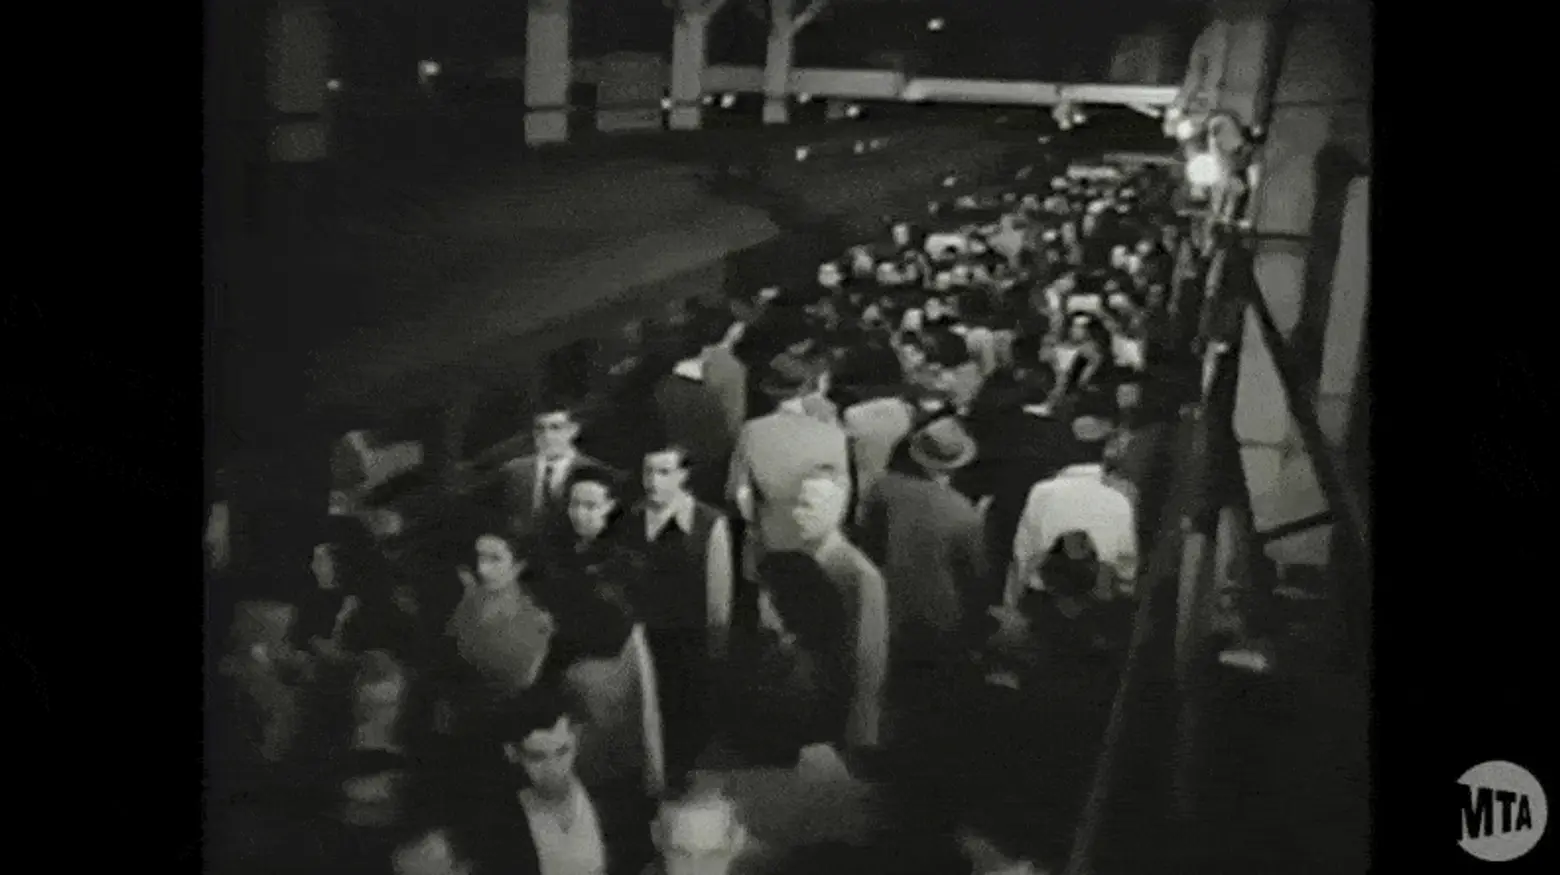 VIDEO: Watch the NYC subway move 7 million people in 1949